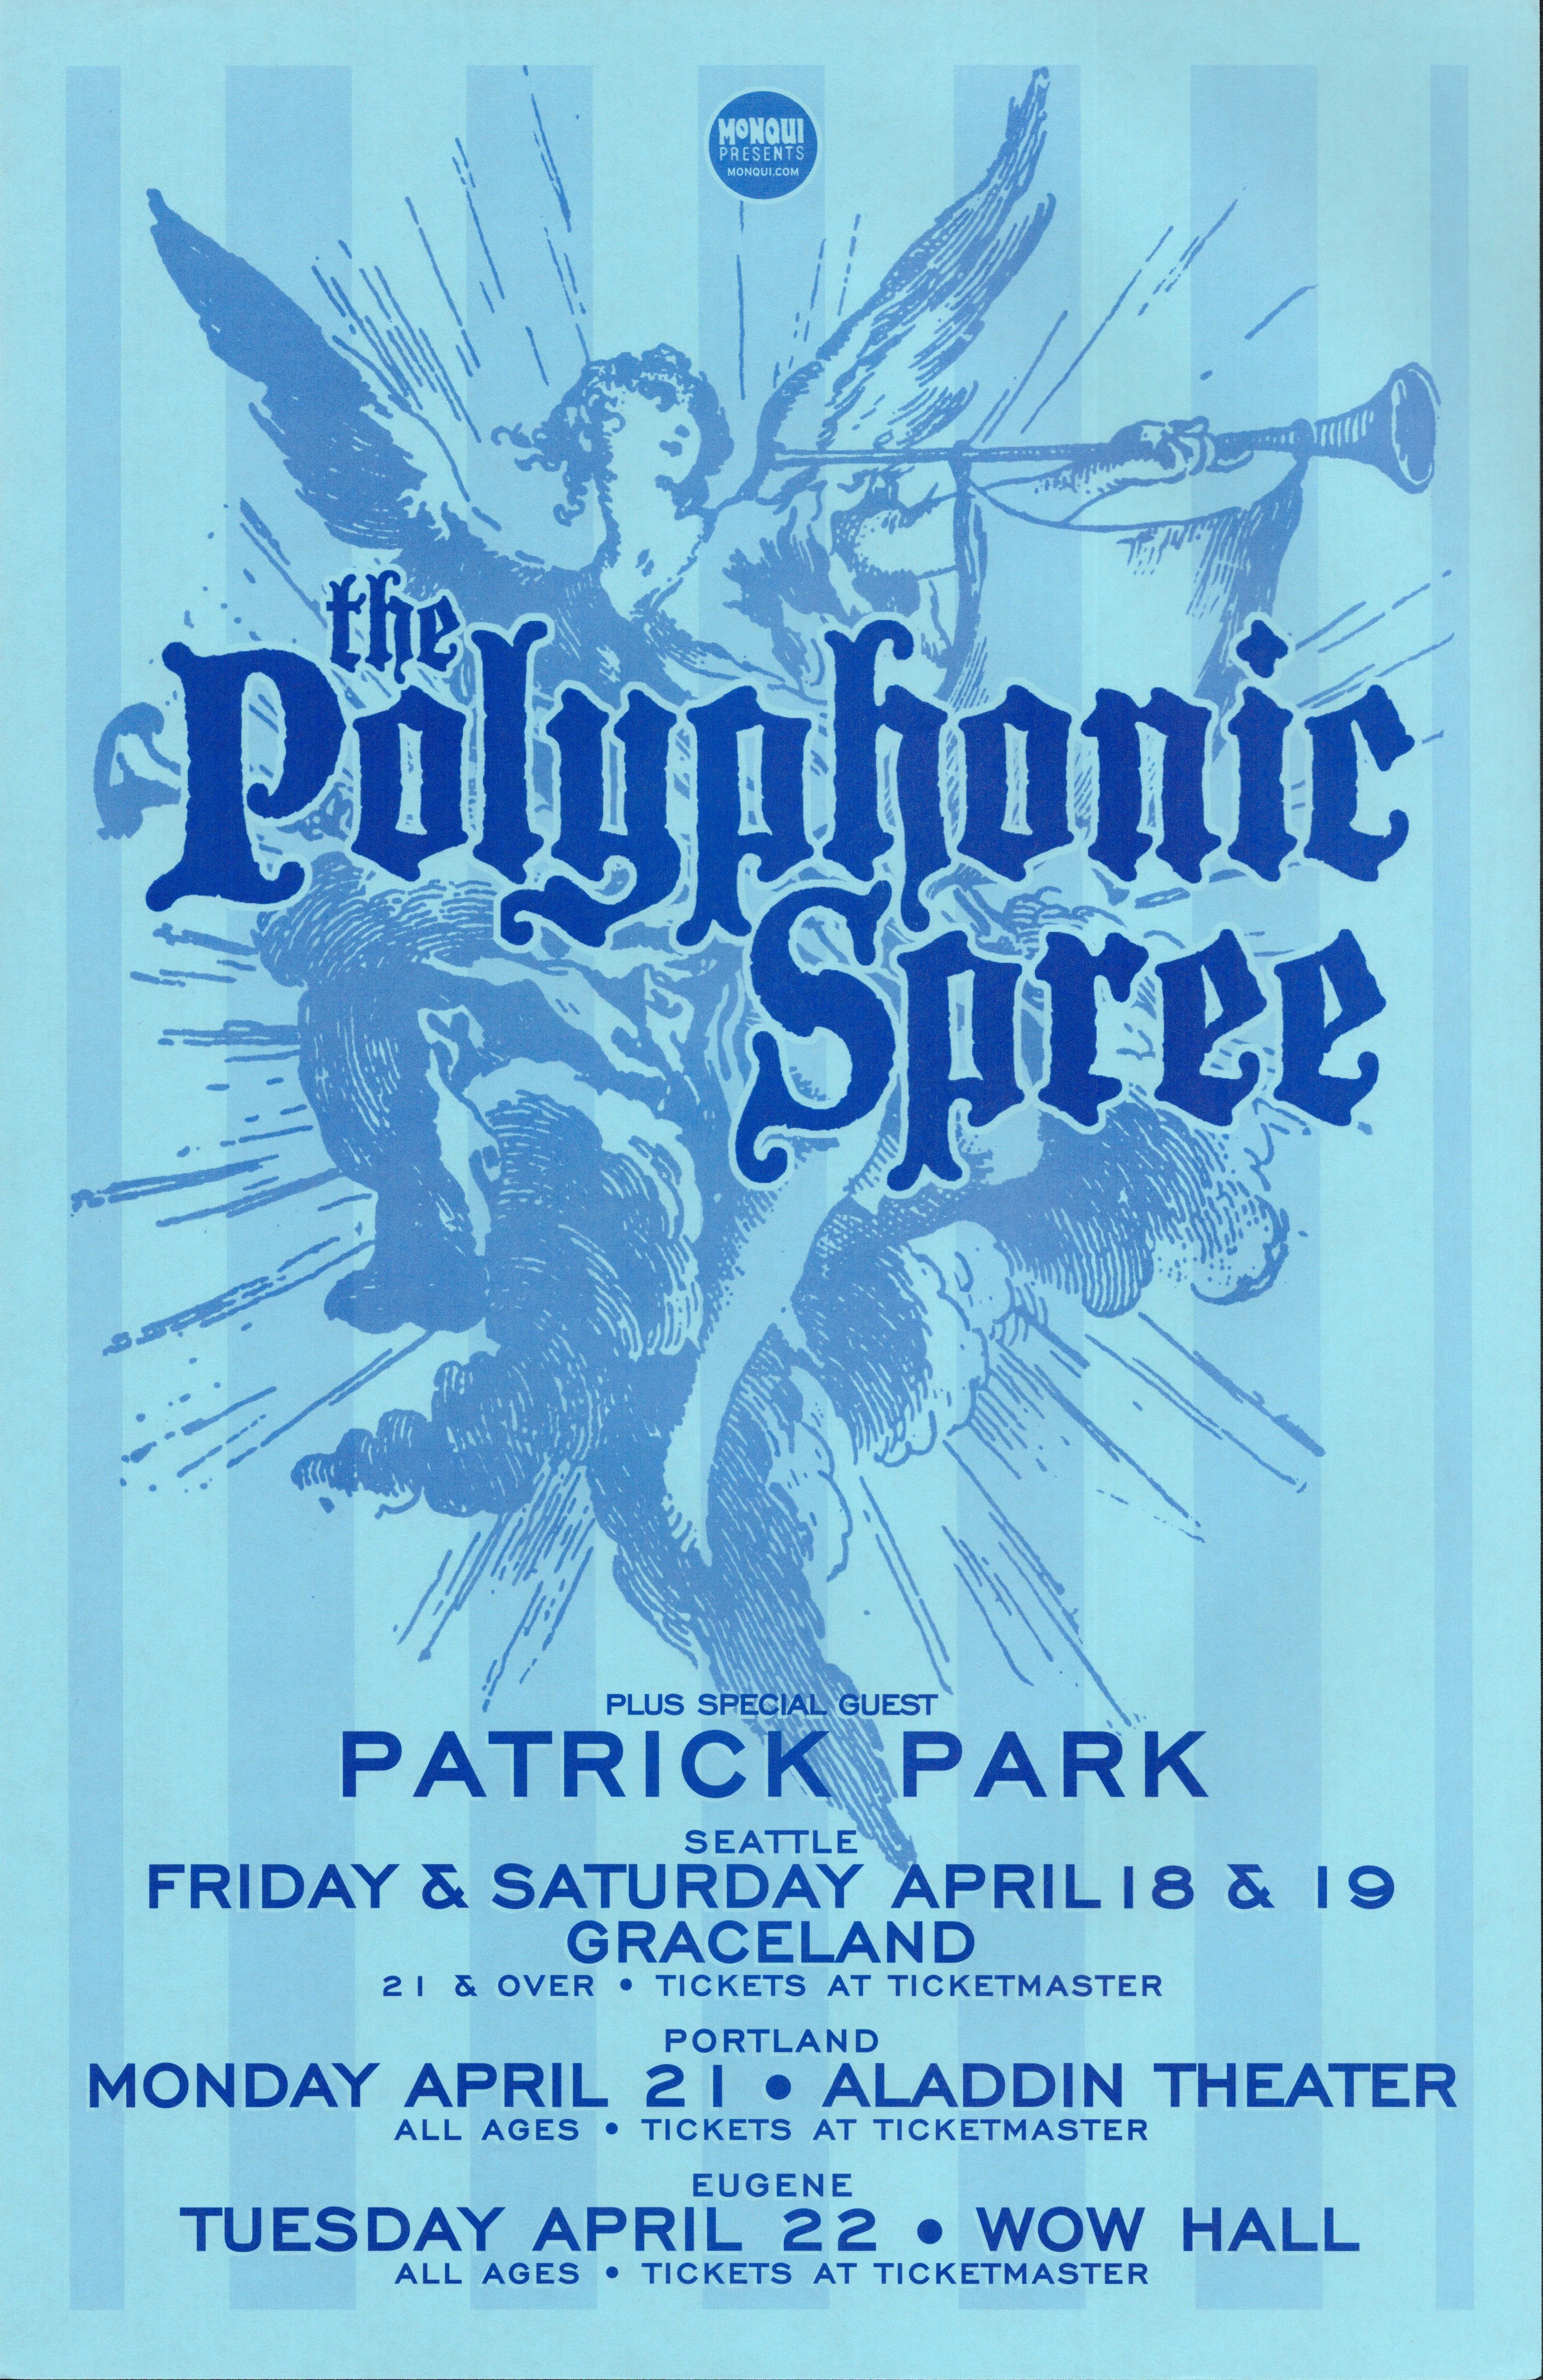 MXP-60.1 Polyphonic Spree Graceland & Aladdin Theater & Wow Hall 2006 Concert Poster